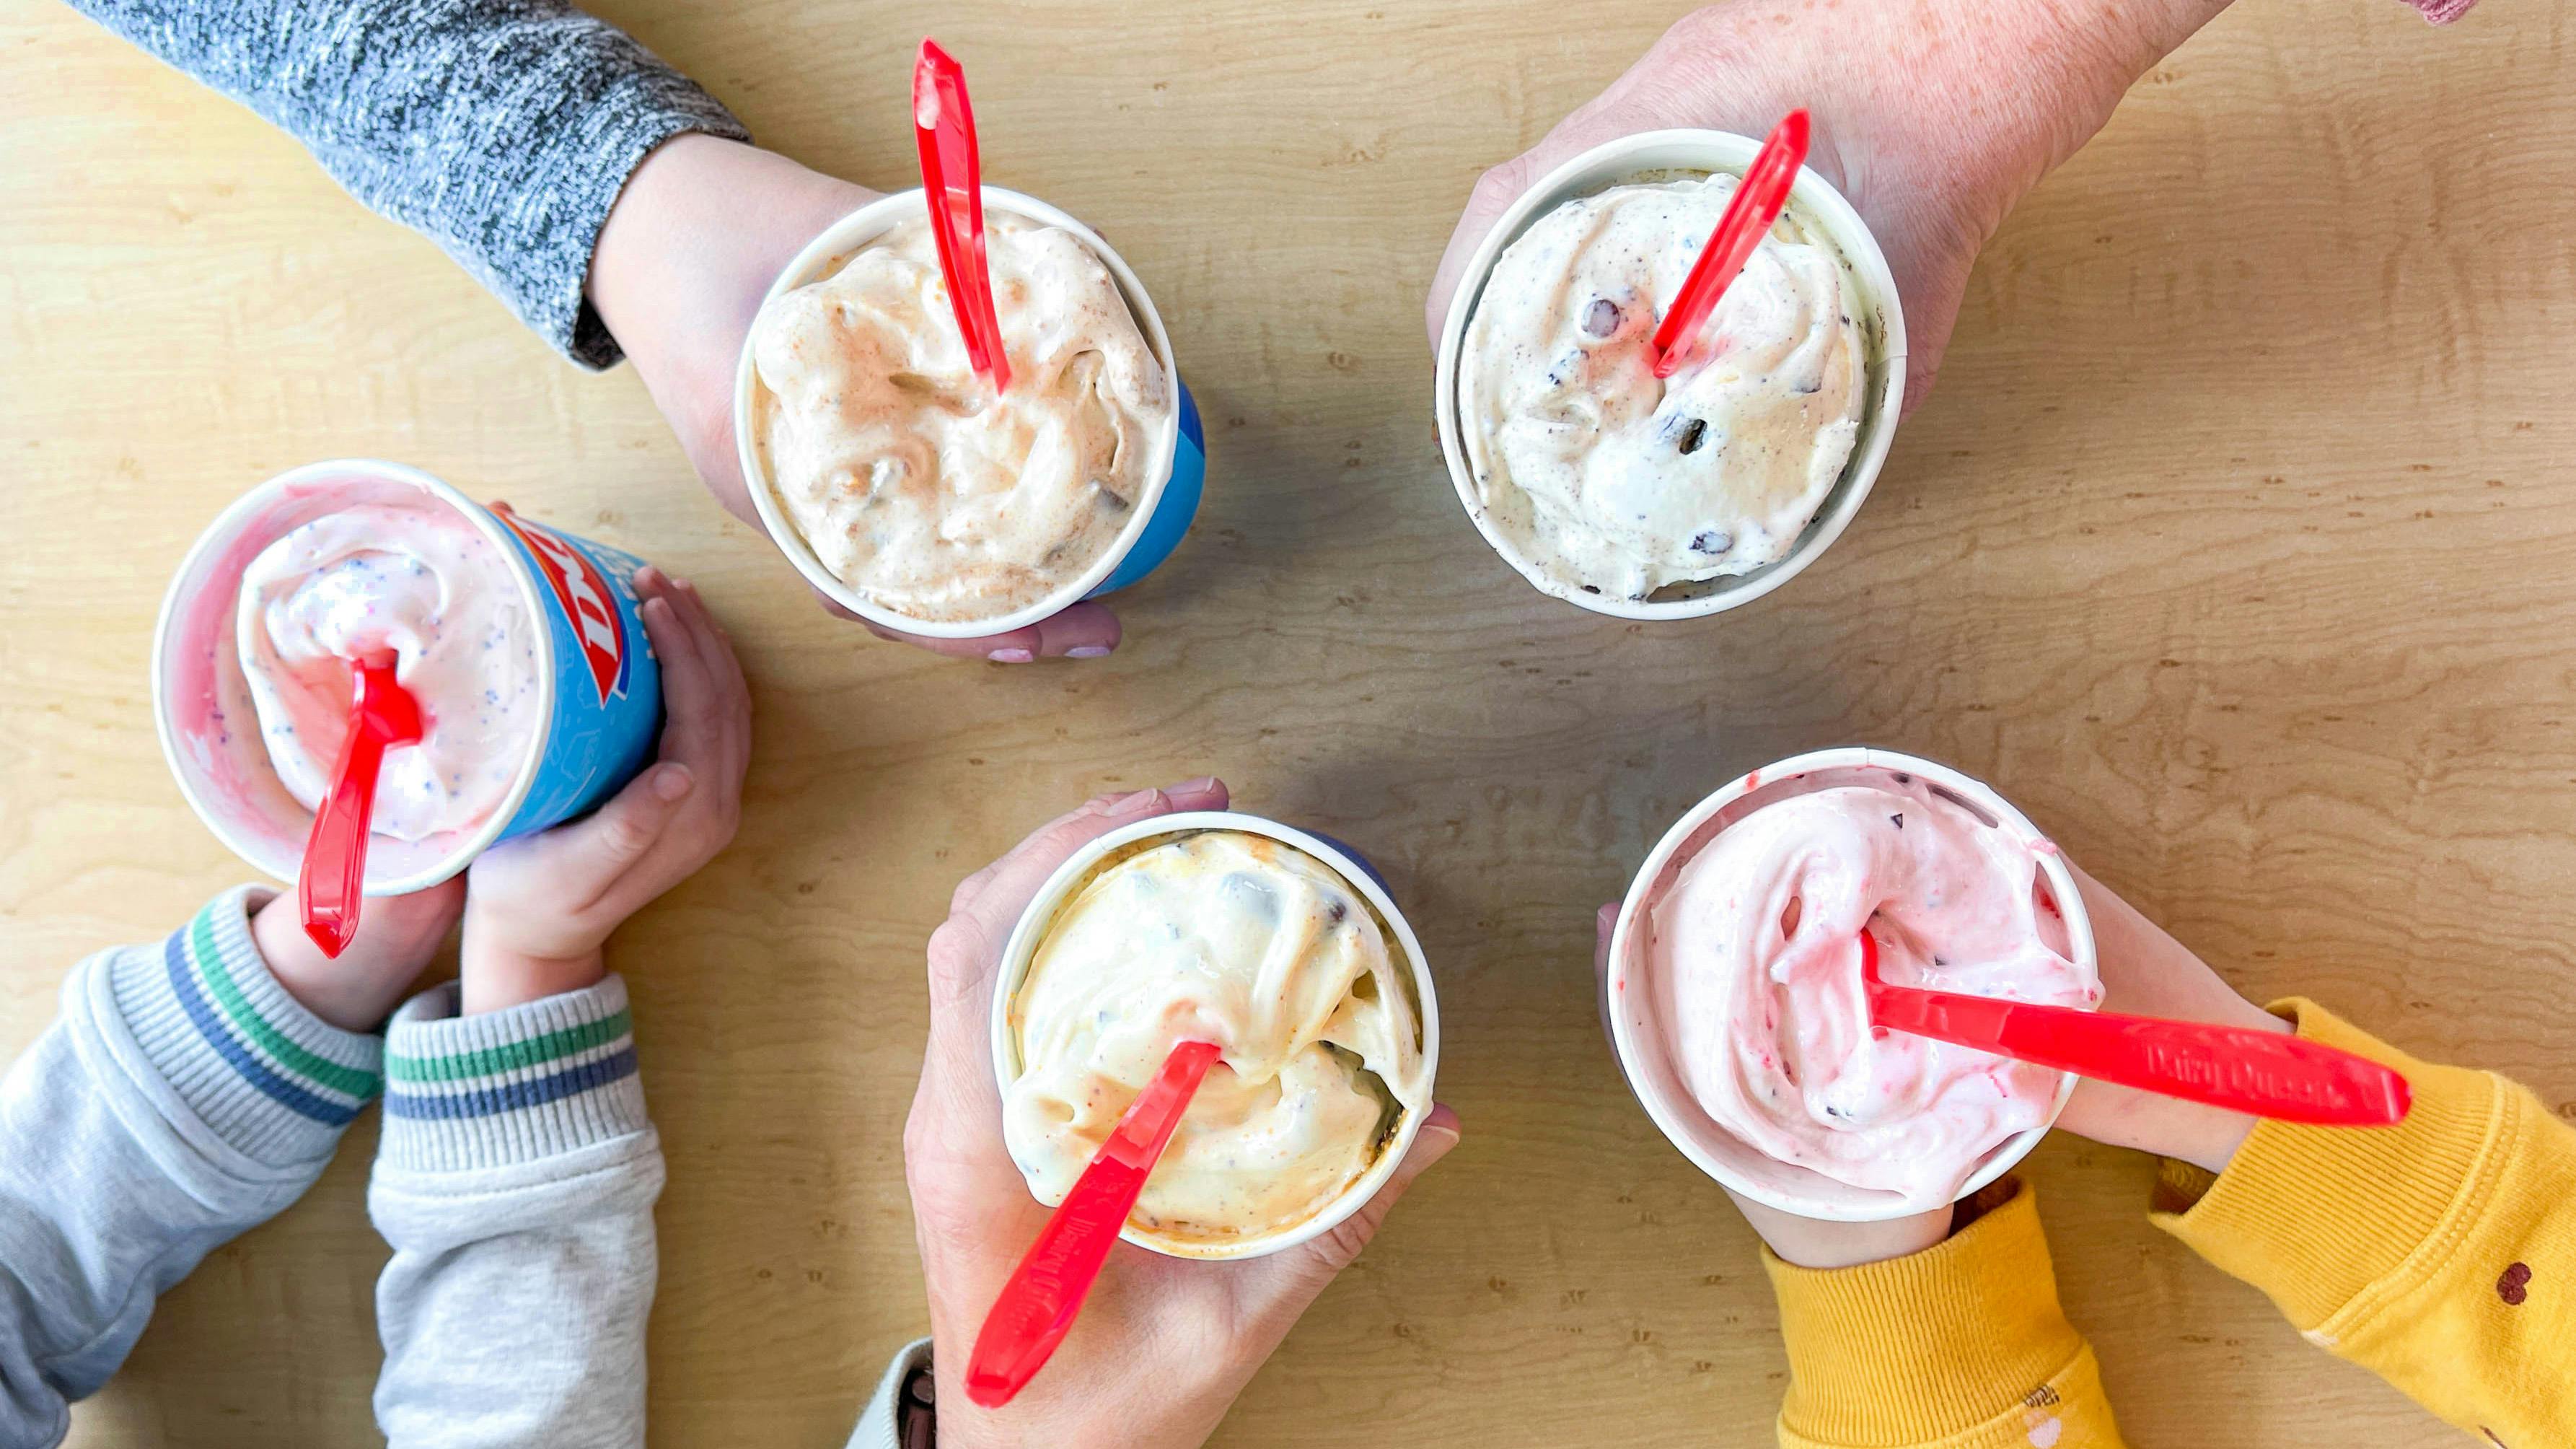 Dairy Queen Summer Blizzard Menu Gets ANOTHER New Entry for July The